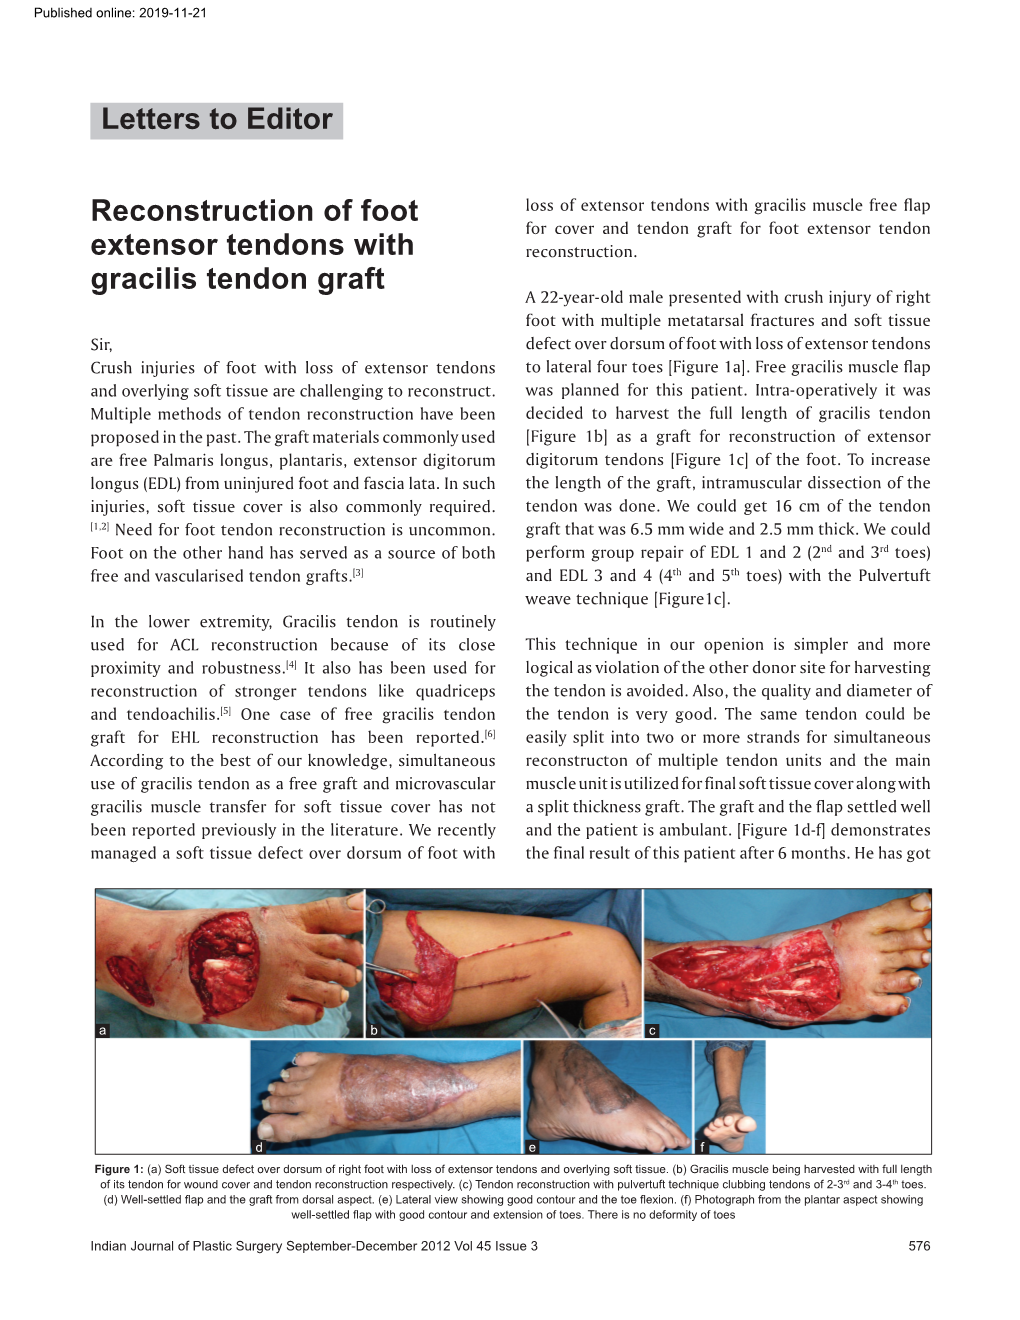 Reconstruction of Foot Extensor Tendons with Gracilis Tendon Graft Letters to Editor